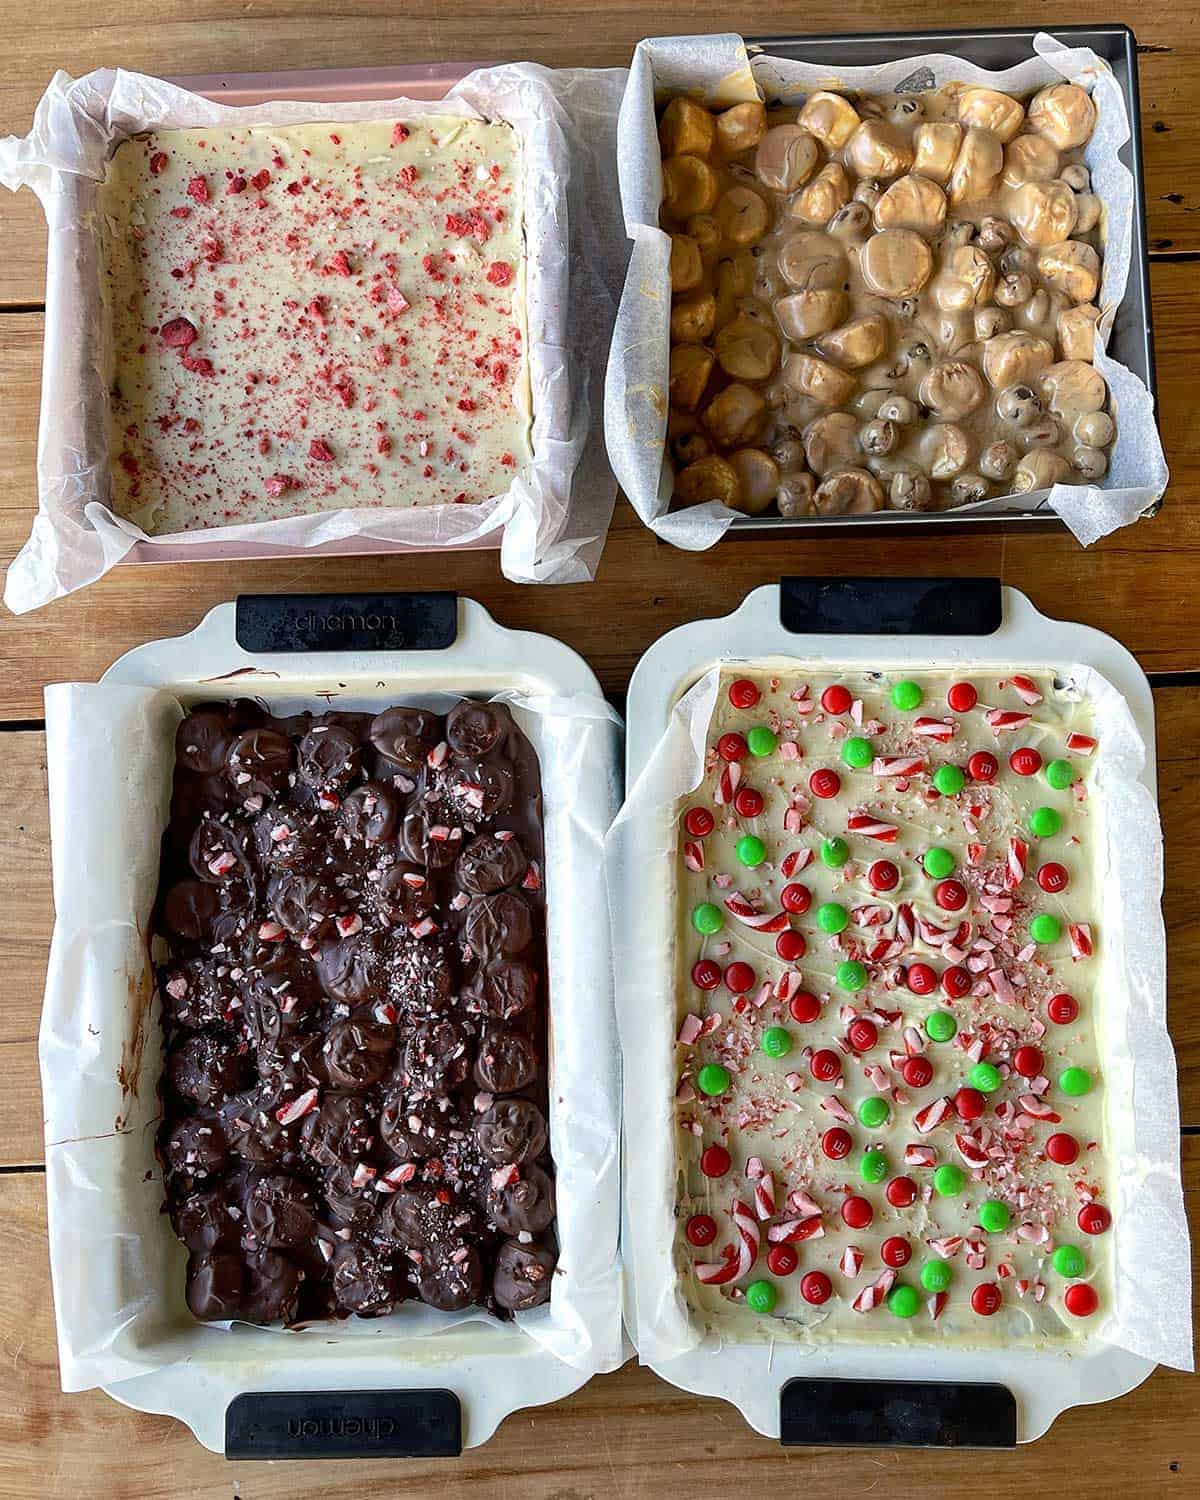 4 types of Christmas treats in baking trays sitting on a wooden bench